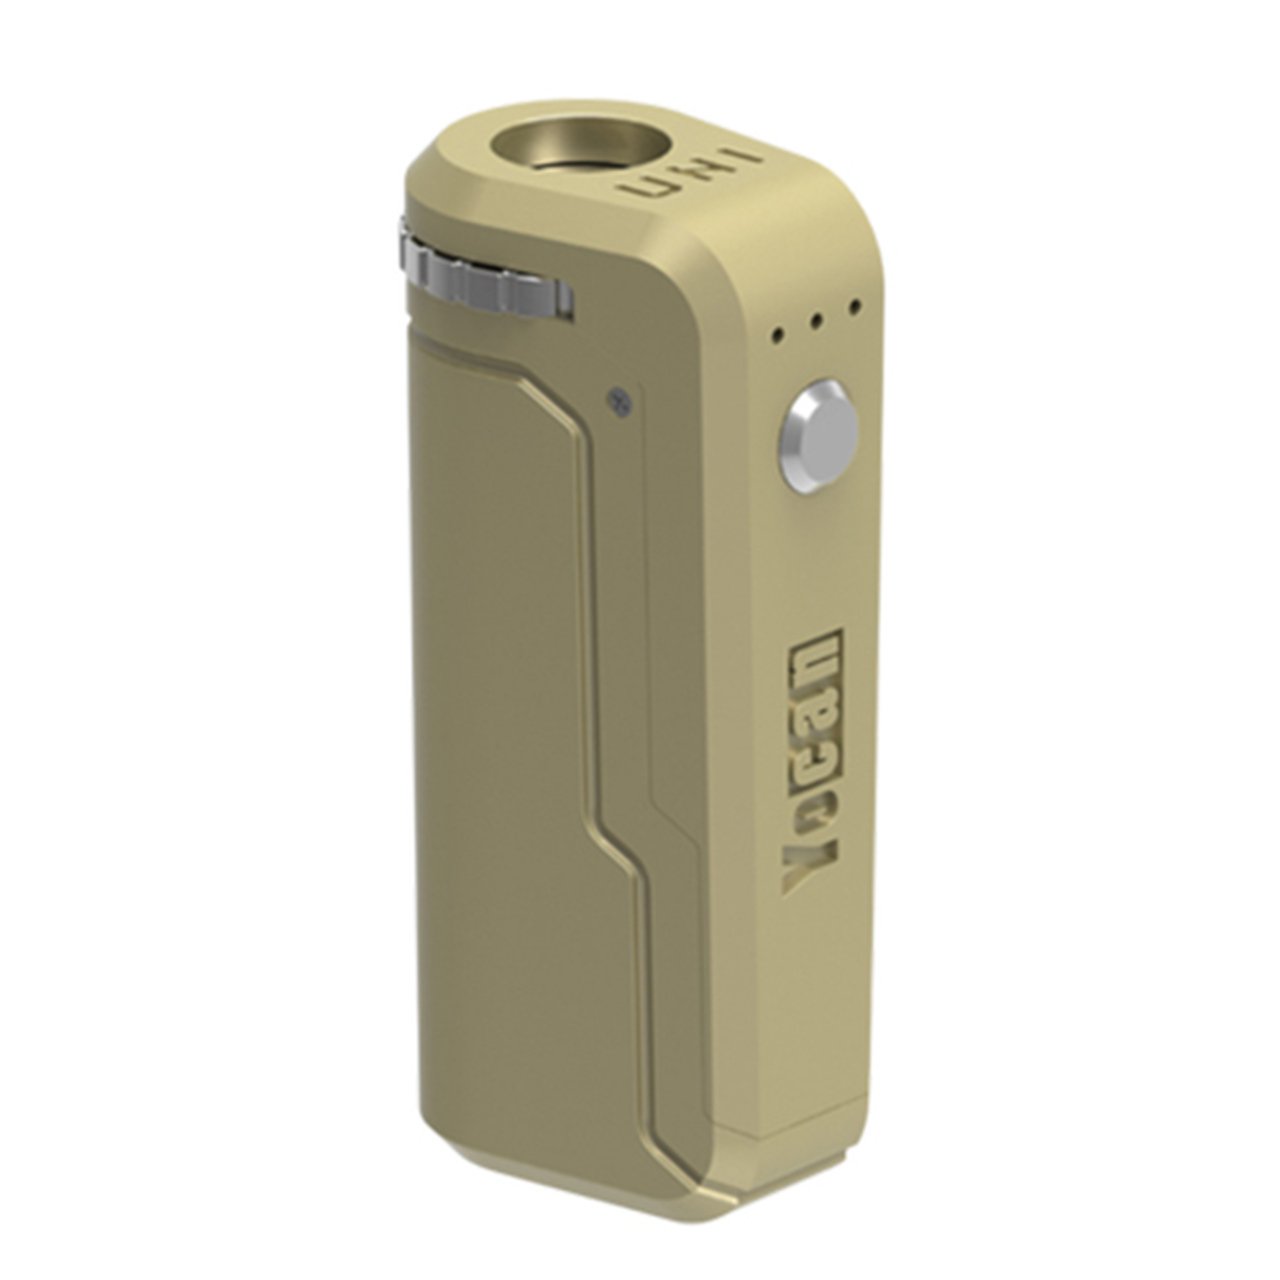 Yocan UNI Universal Portable Box Mod Flower Power Packages Gold 